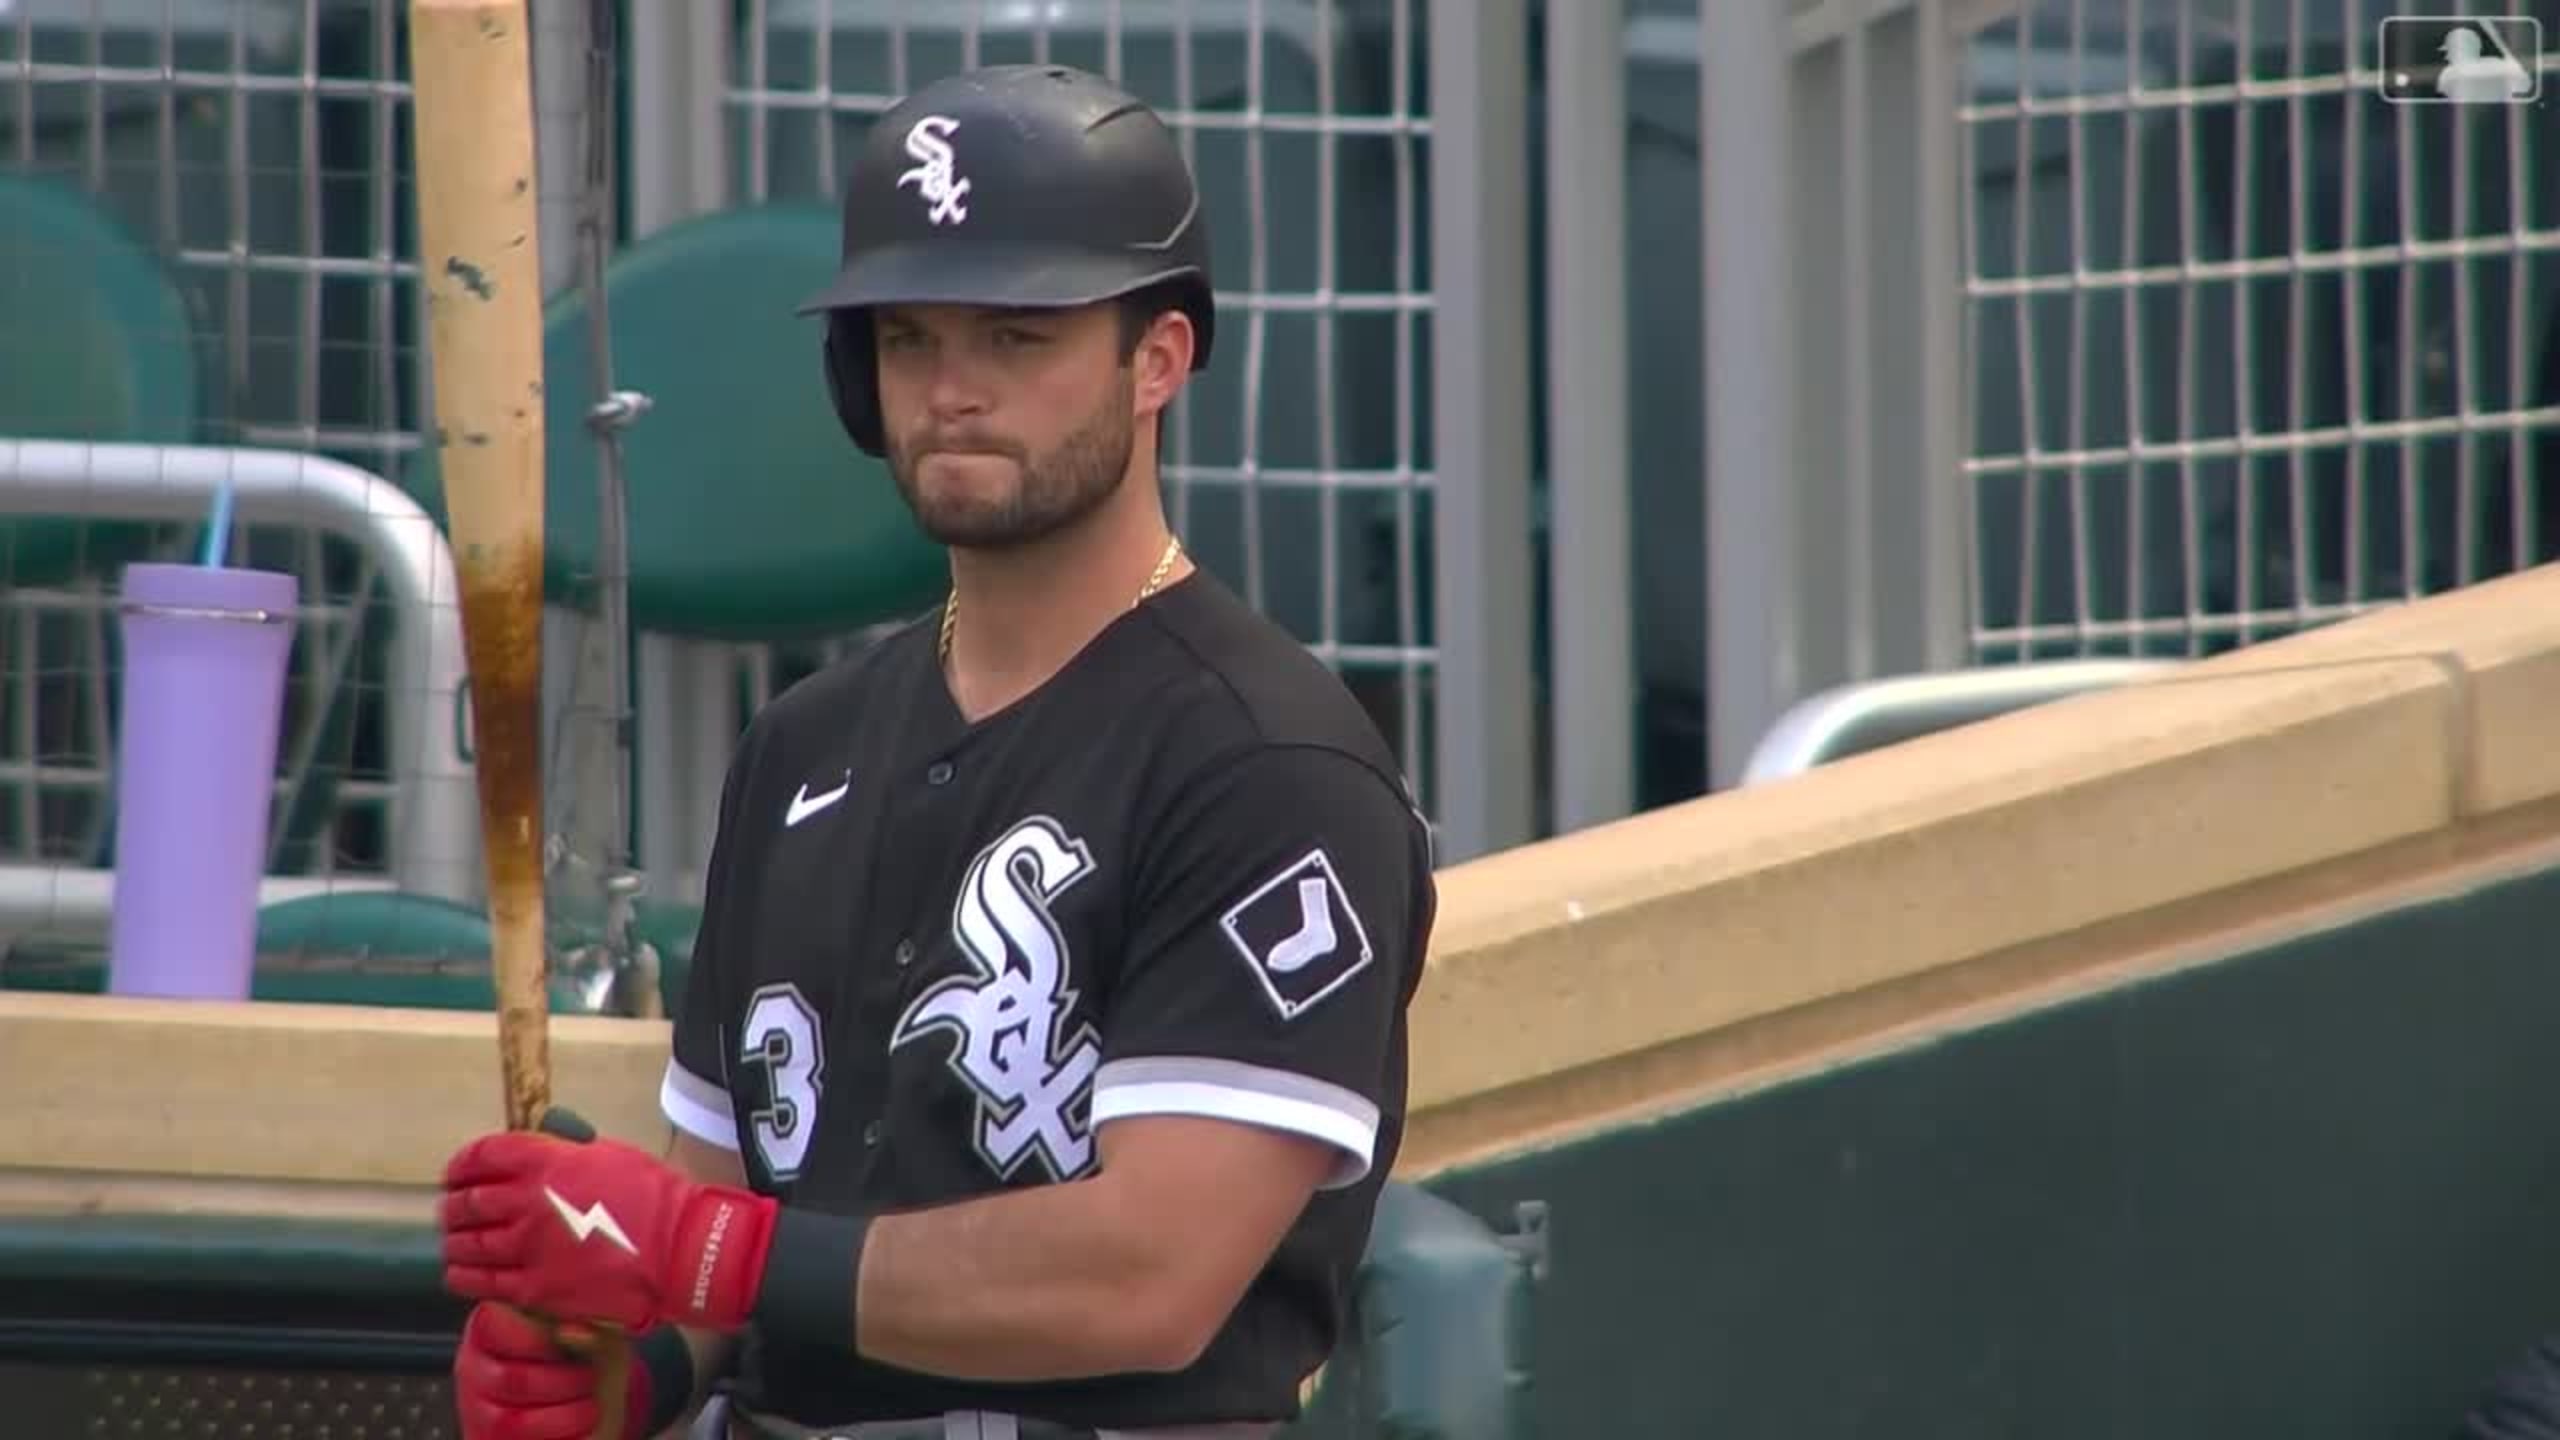 That's a first: All-Garcia outfield leads White Sox past Twins